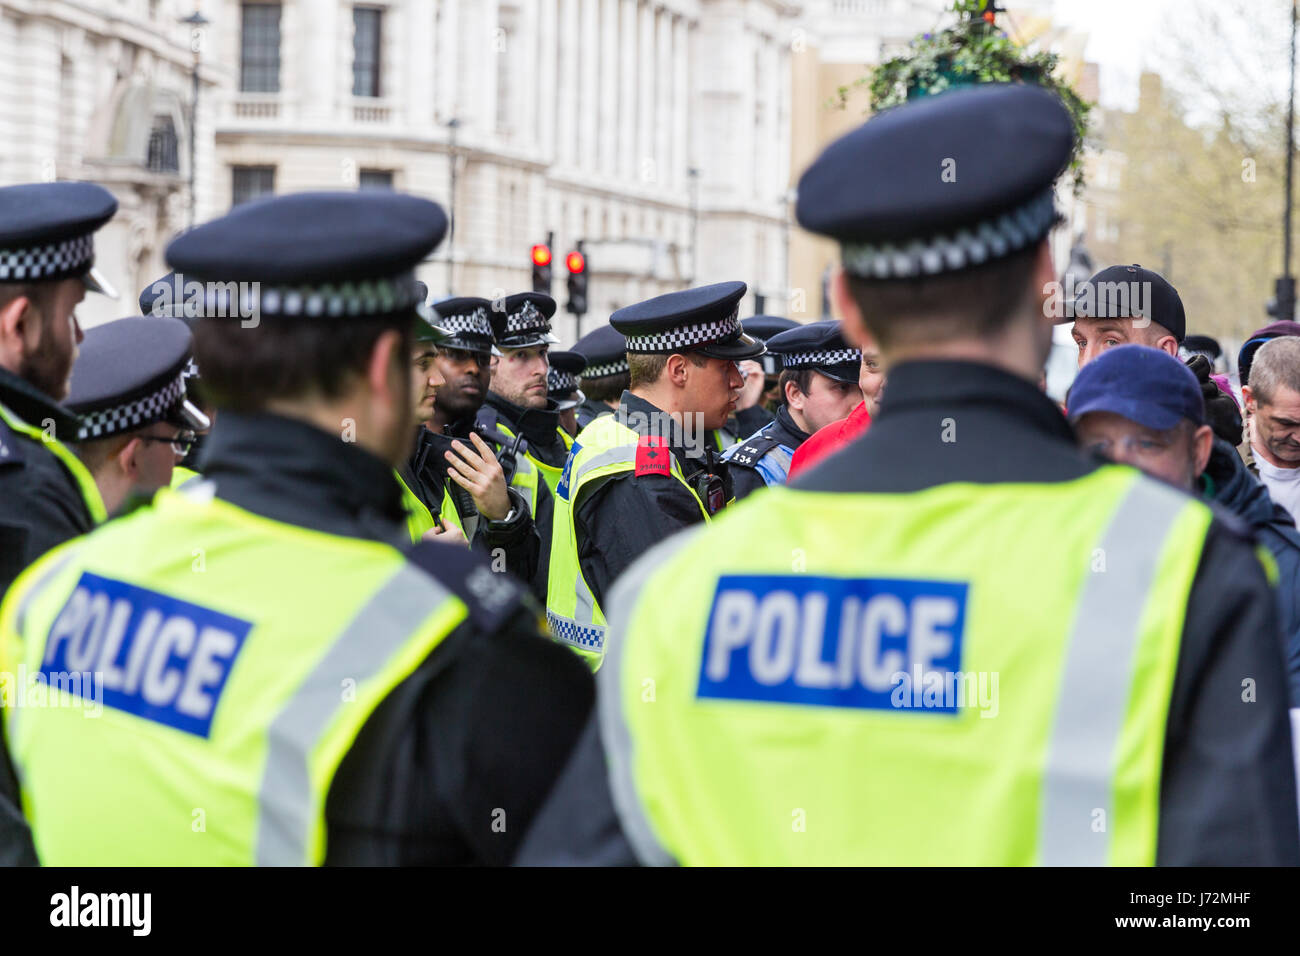 London, UK - 1st April, 2017. Police trying to keep in order protest against Islamists, ISIS. Stock Photo